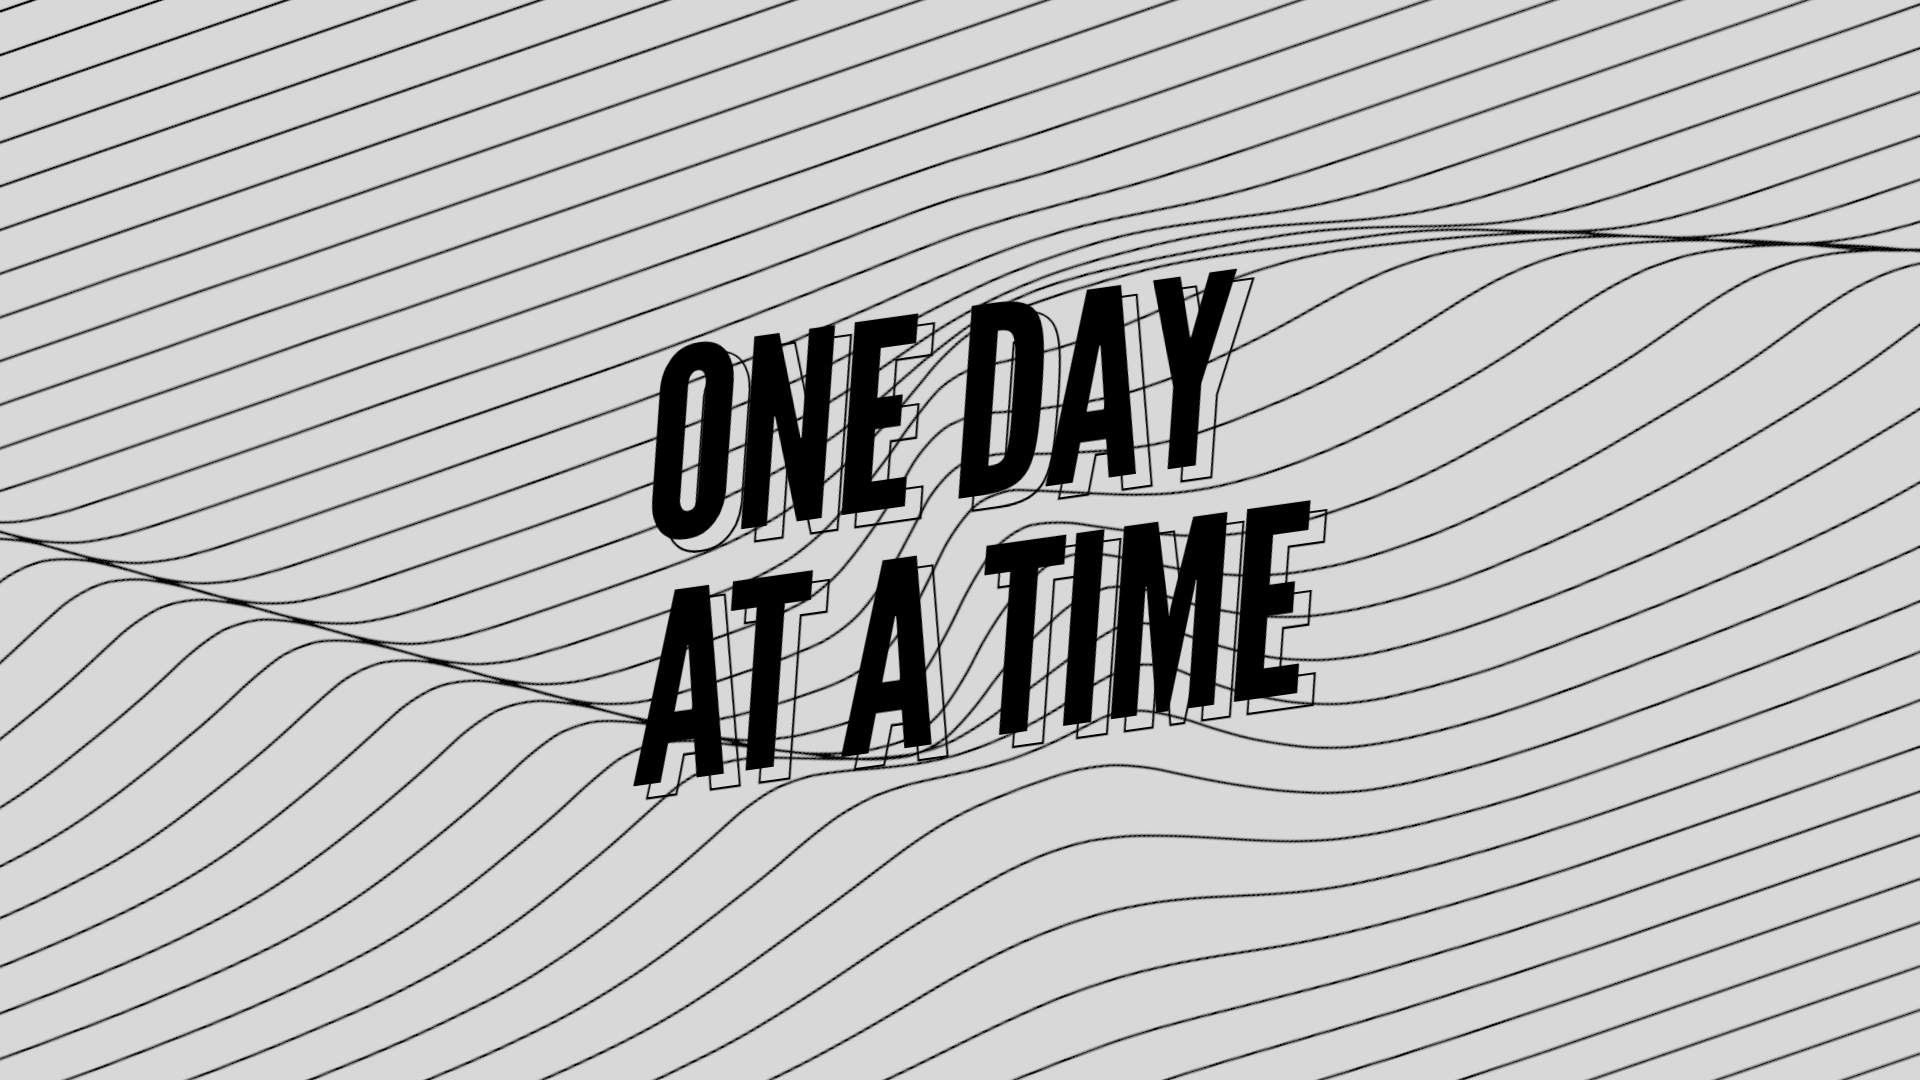 One Day at a Time Pt. 7